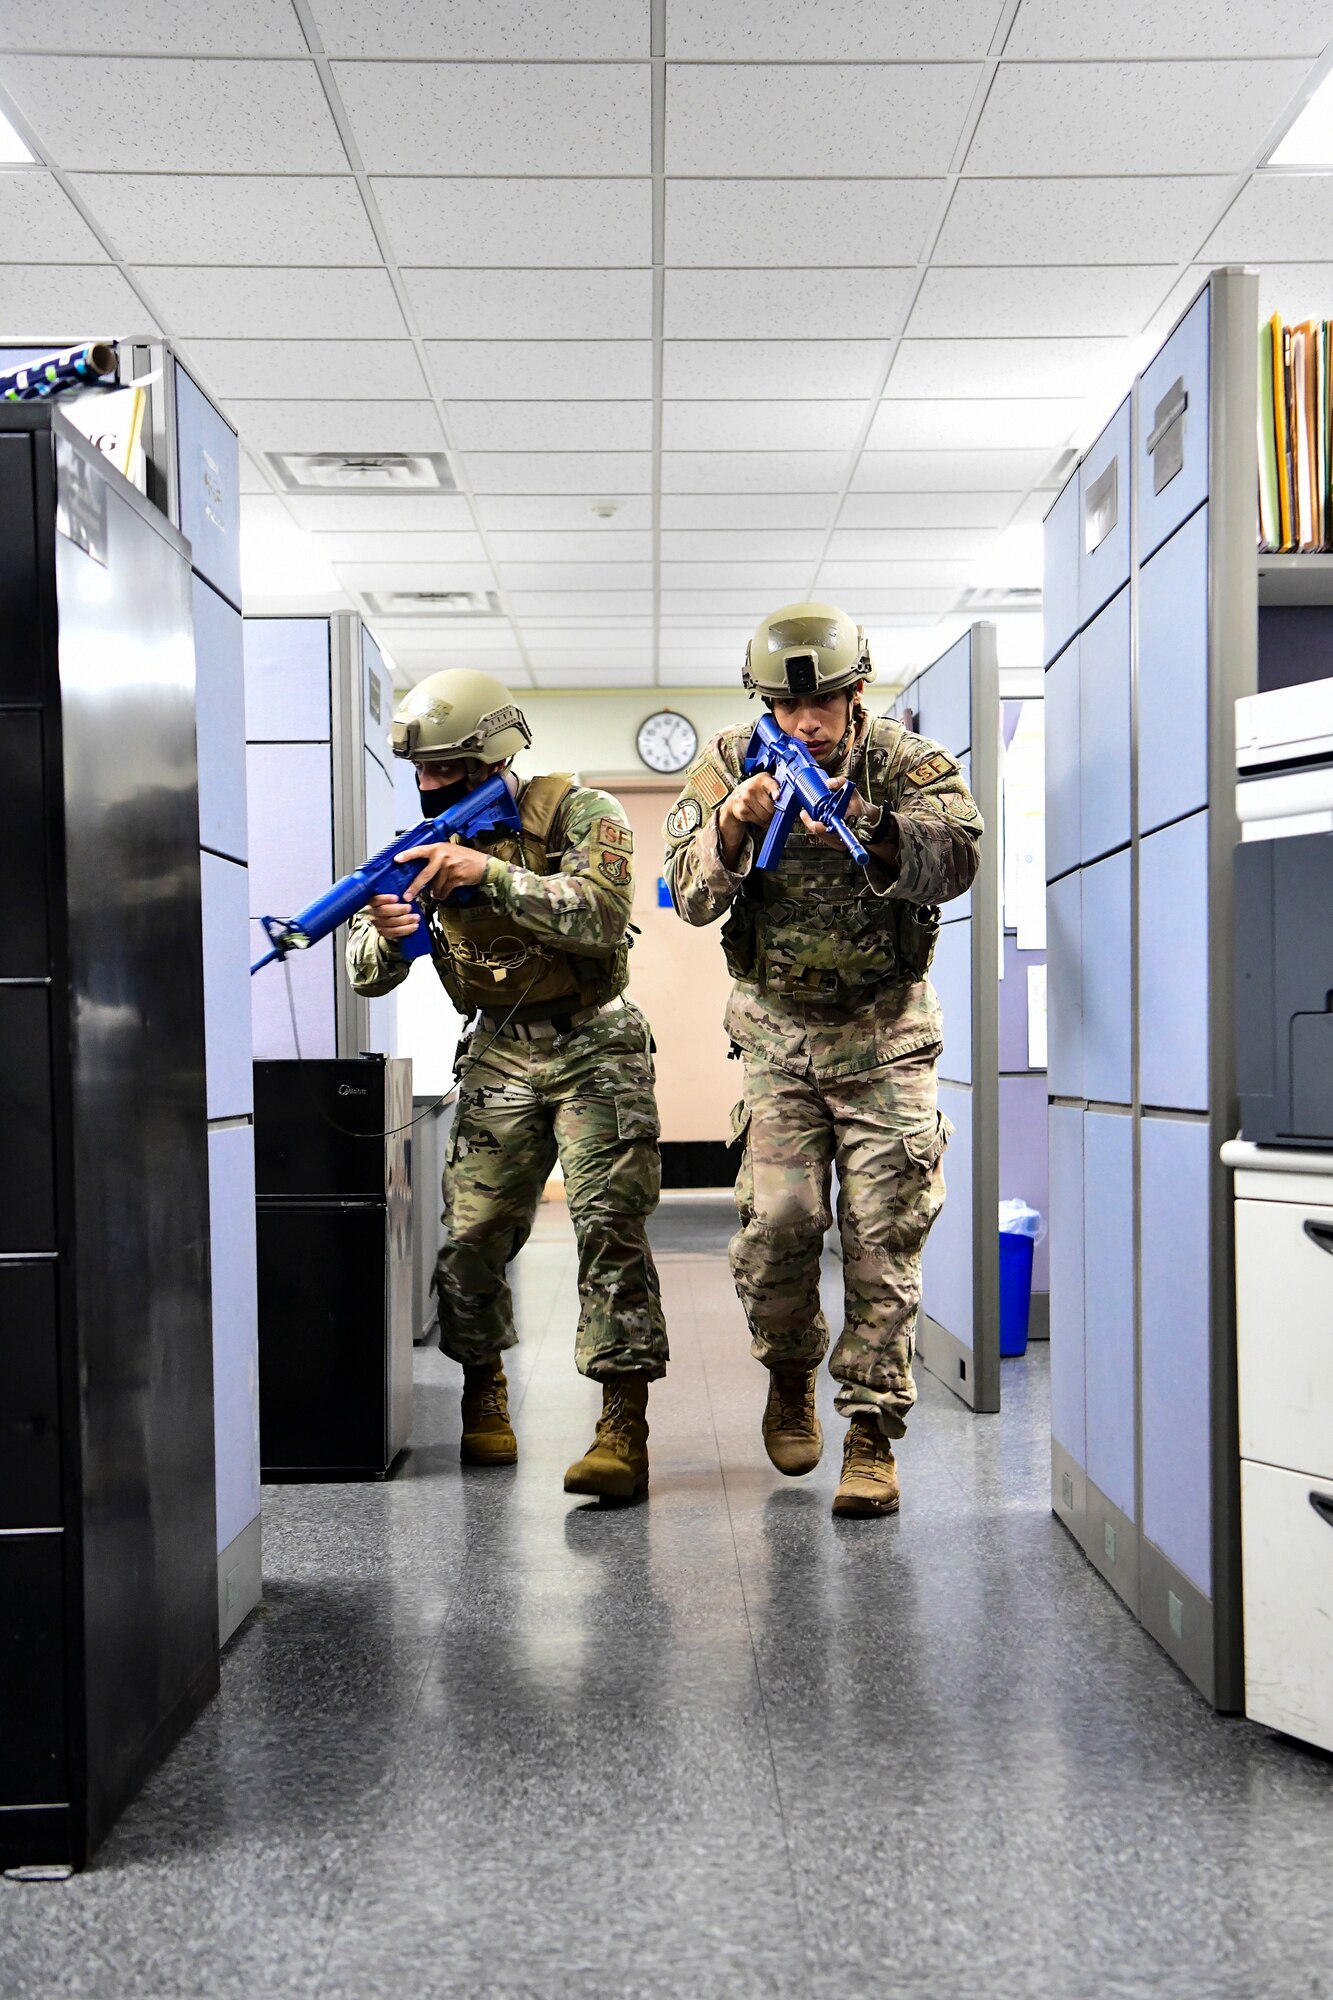 Airmen clear out a building during training.